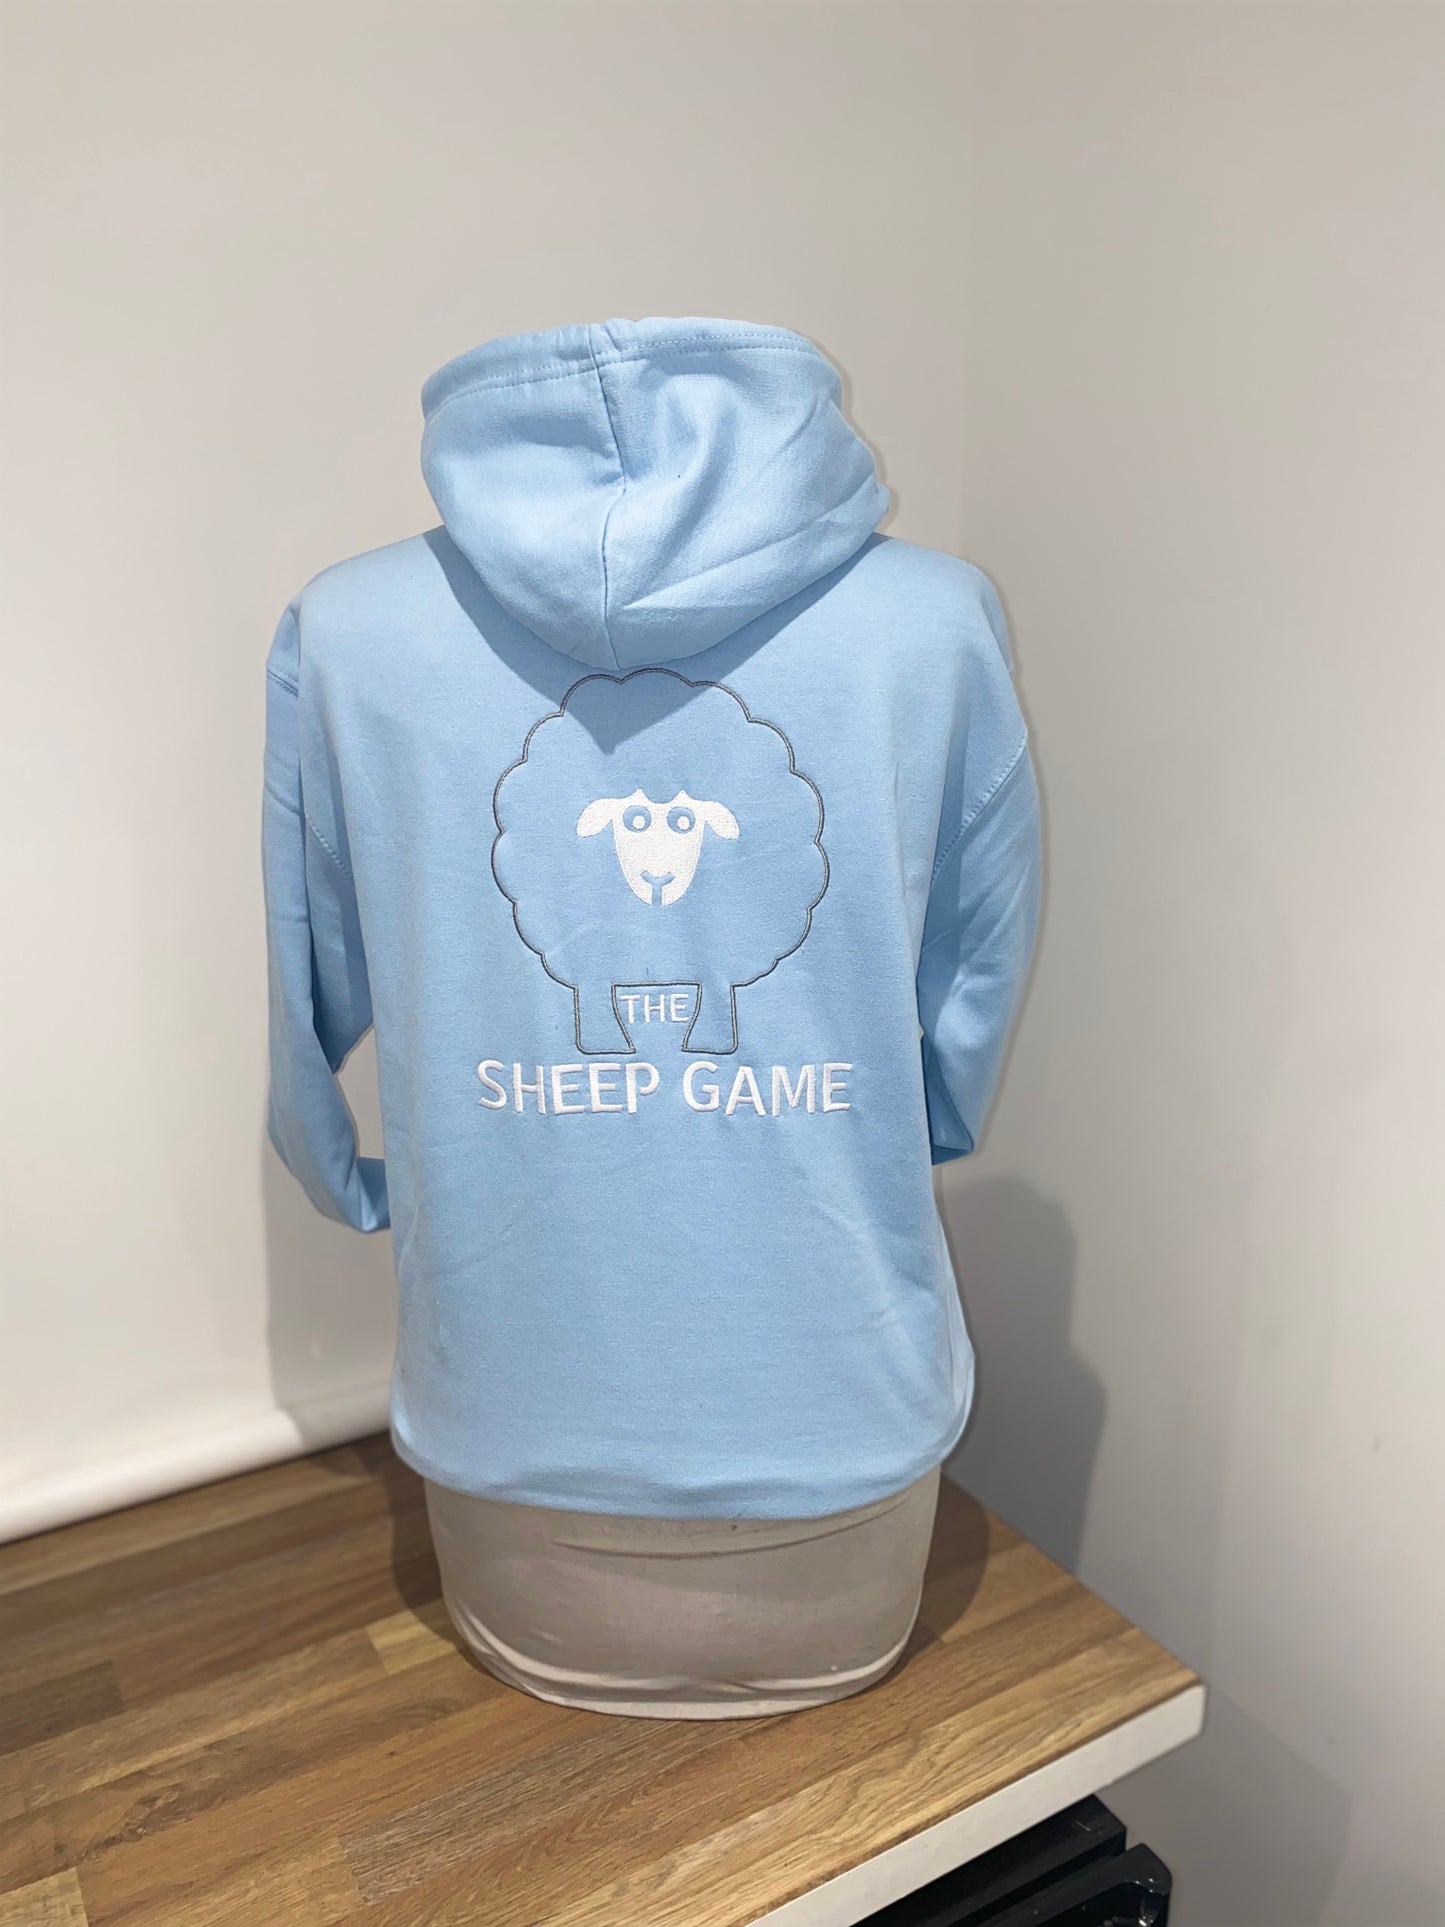 (Old Style) - Adult Hoody - Sky Blue